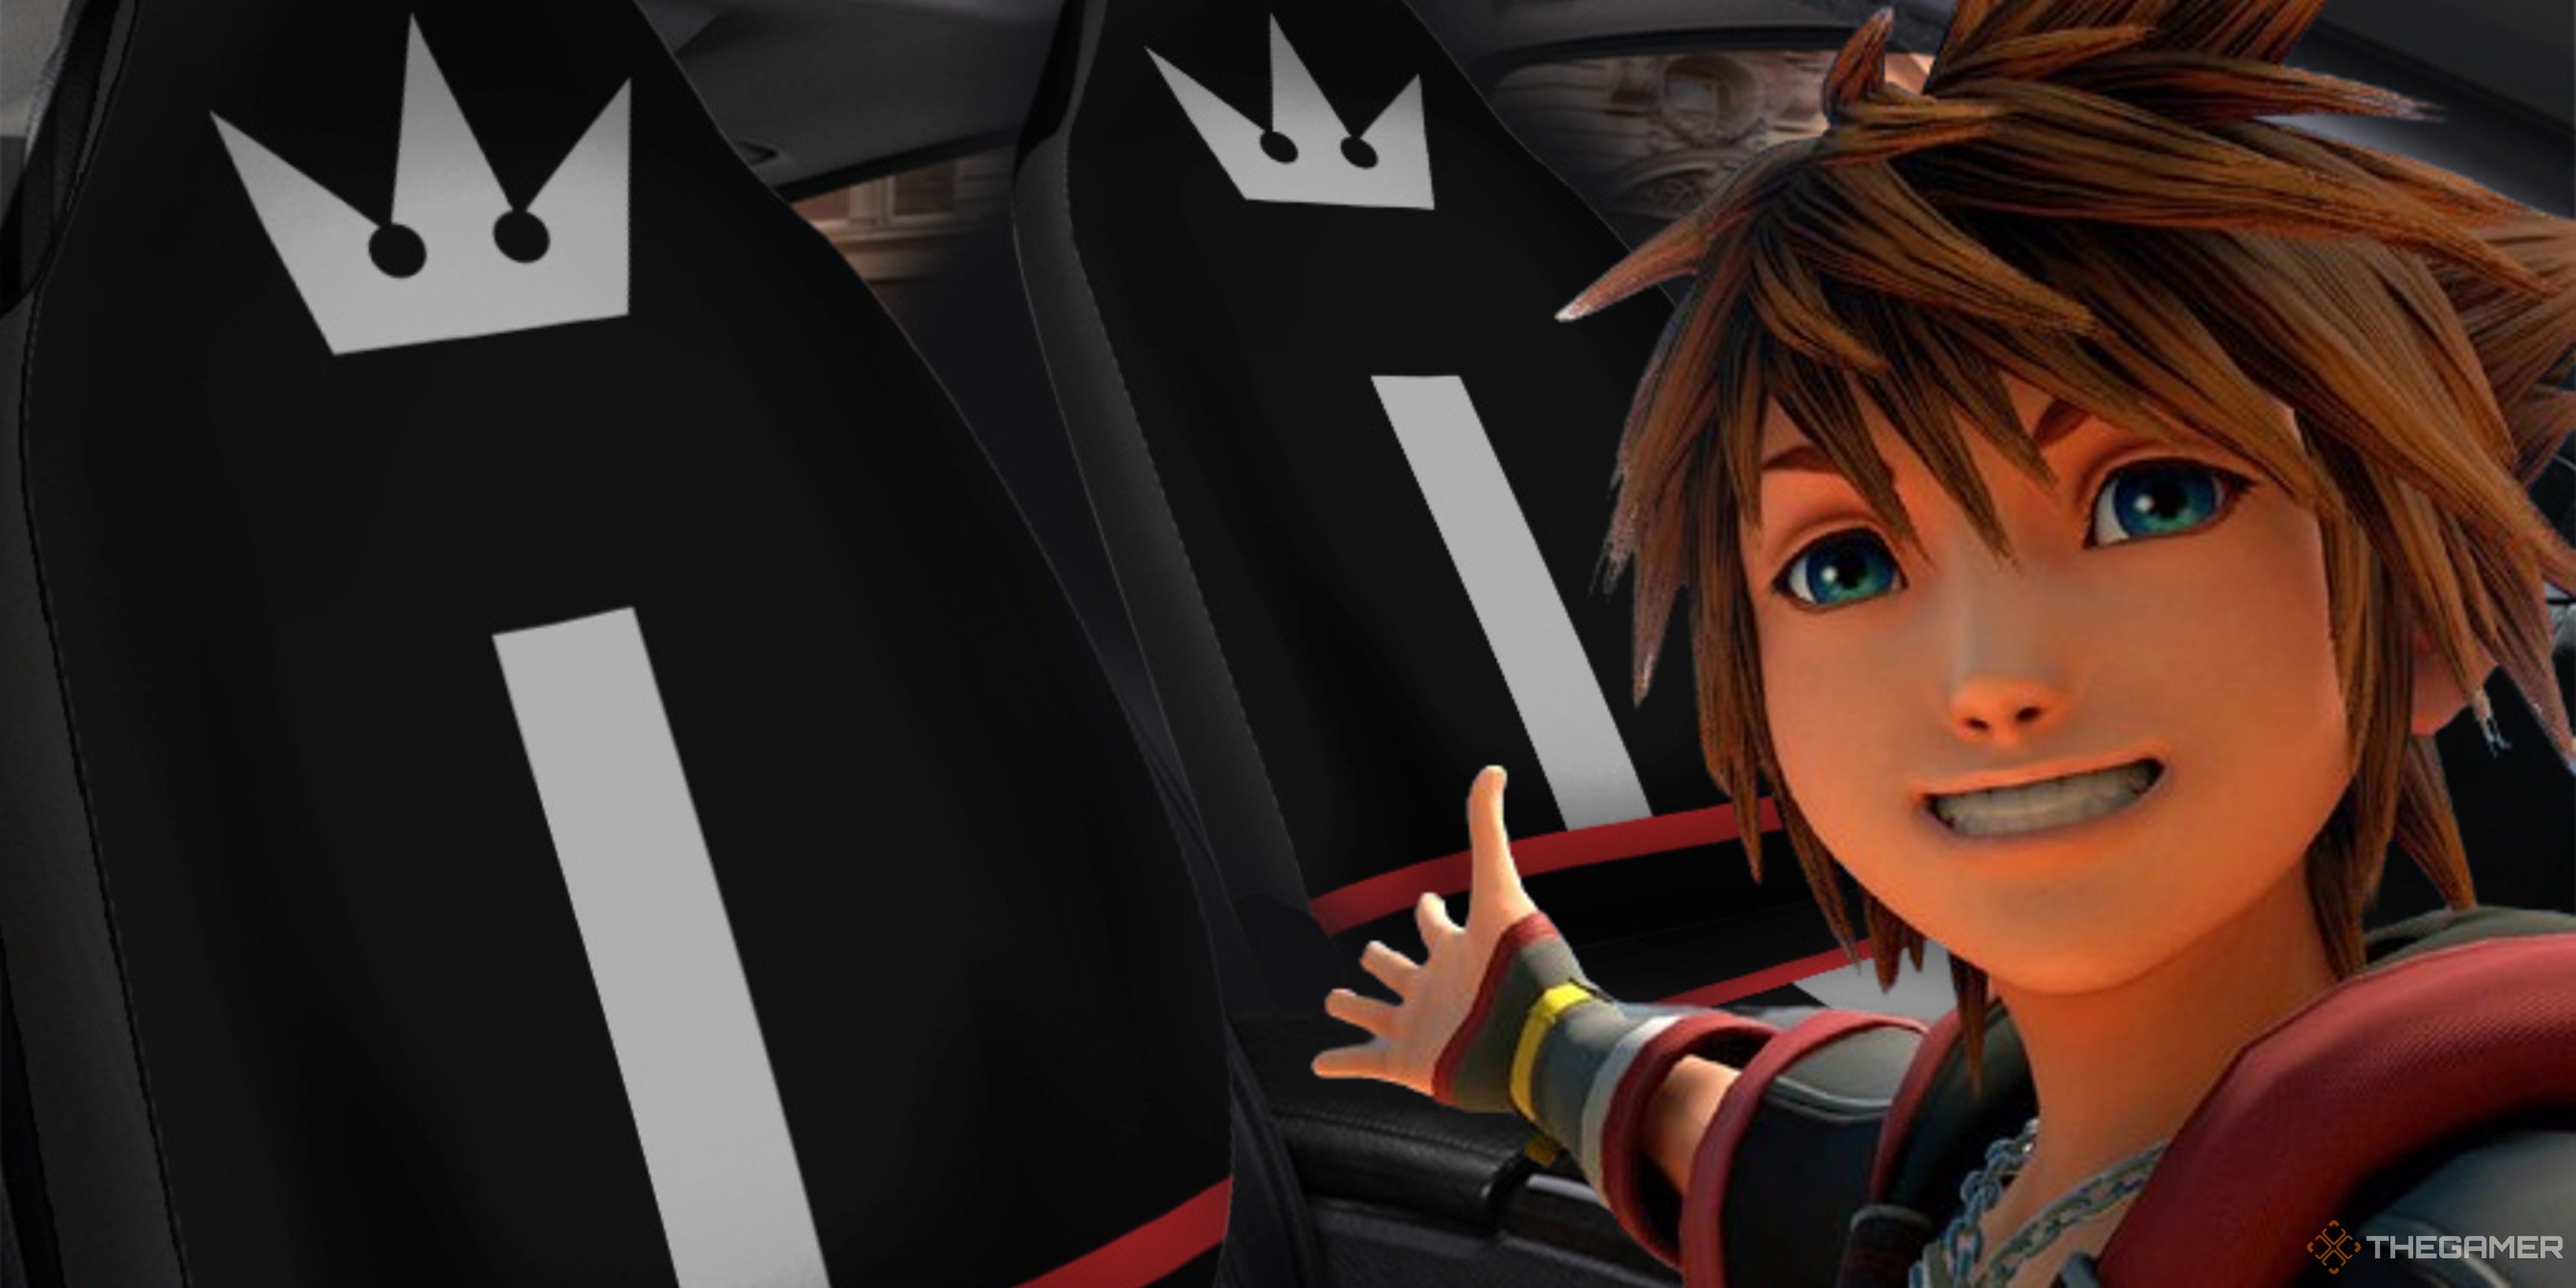 sora showing you some kingdom hearts car seat covers